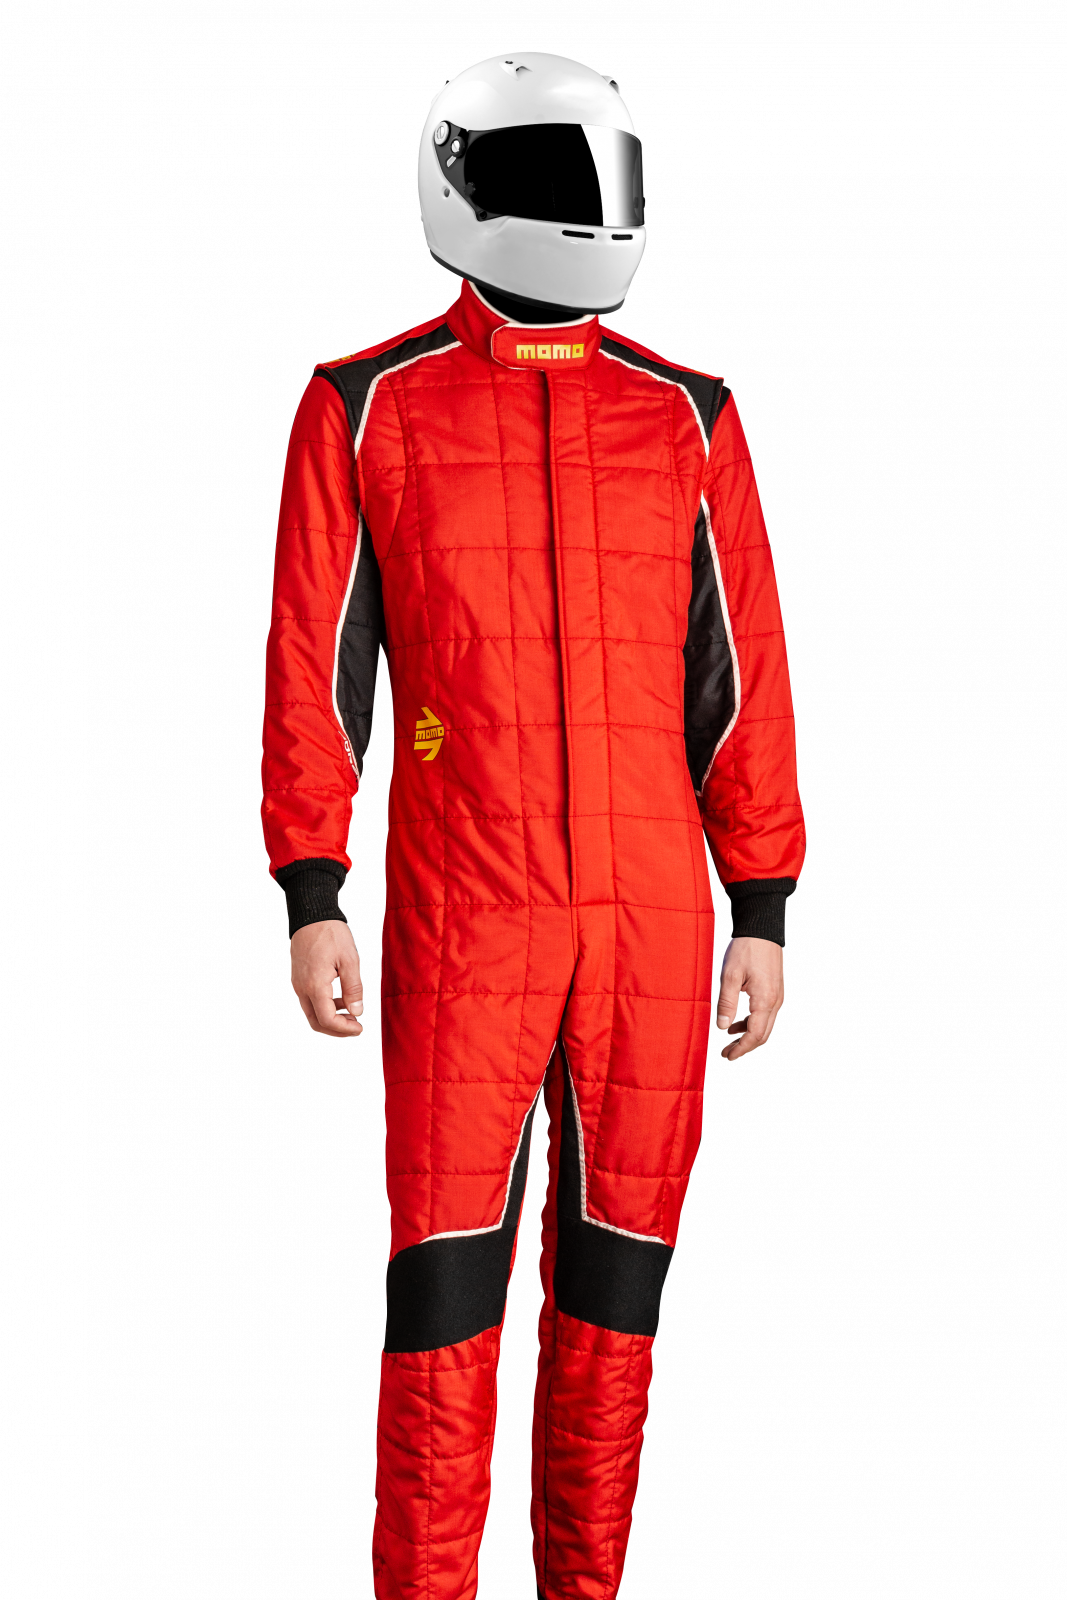 MOMO Corsa Evo Red Size 60 Racing Suit TUCOEVORED60